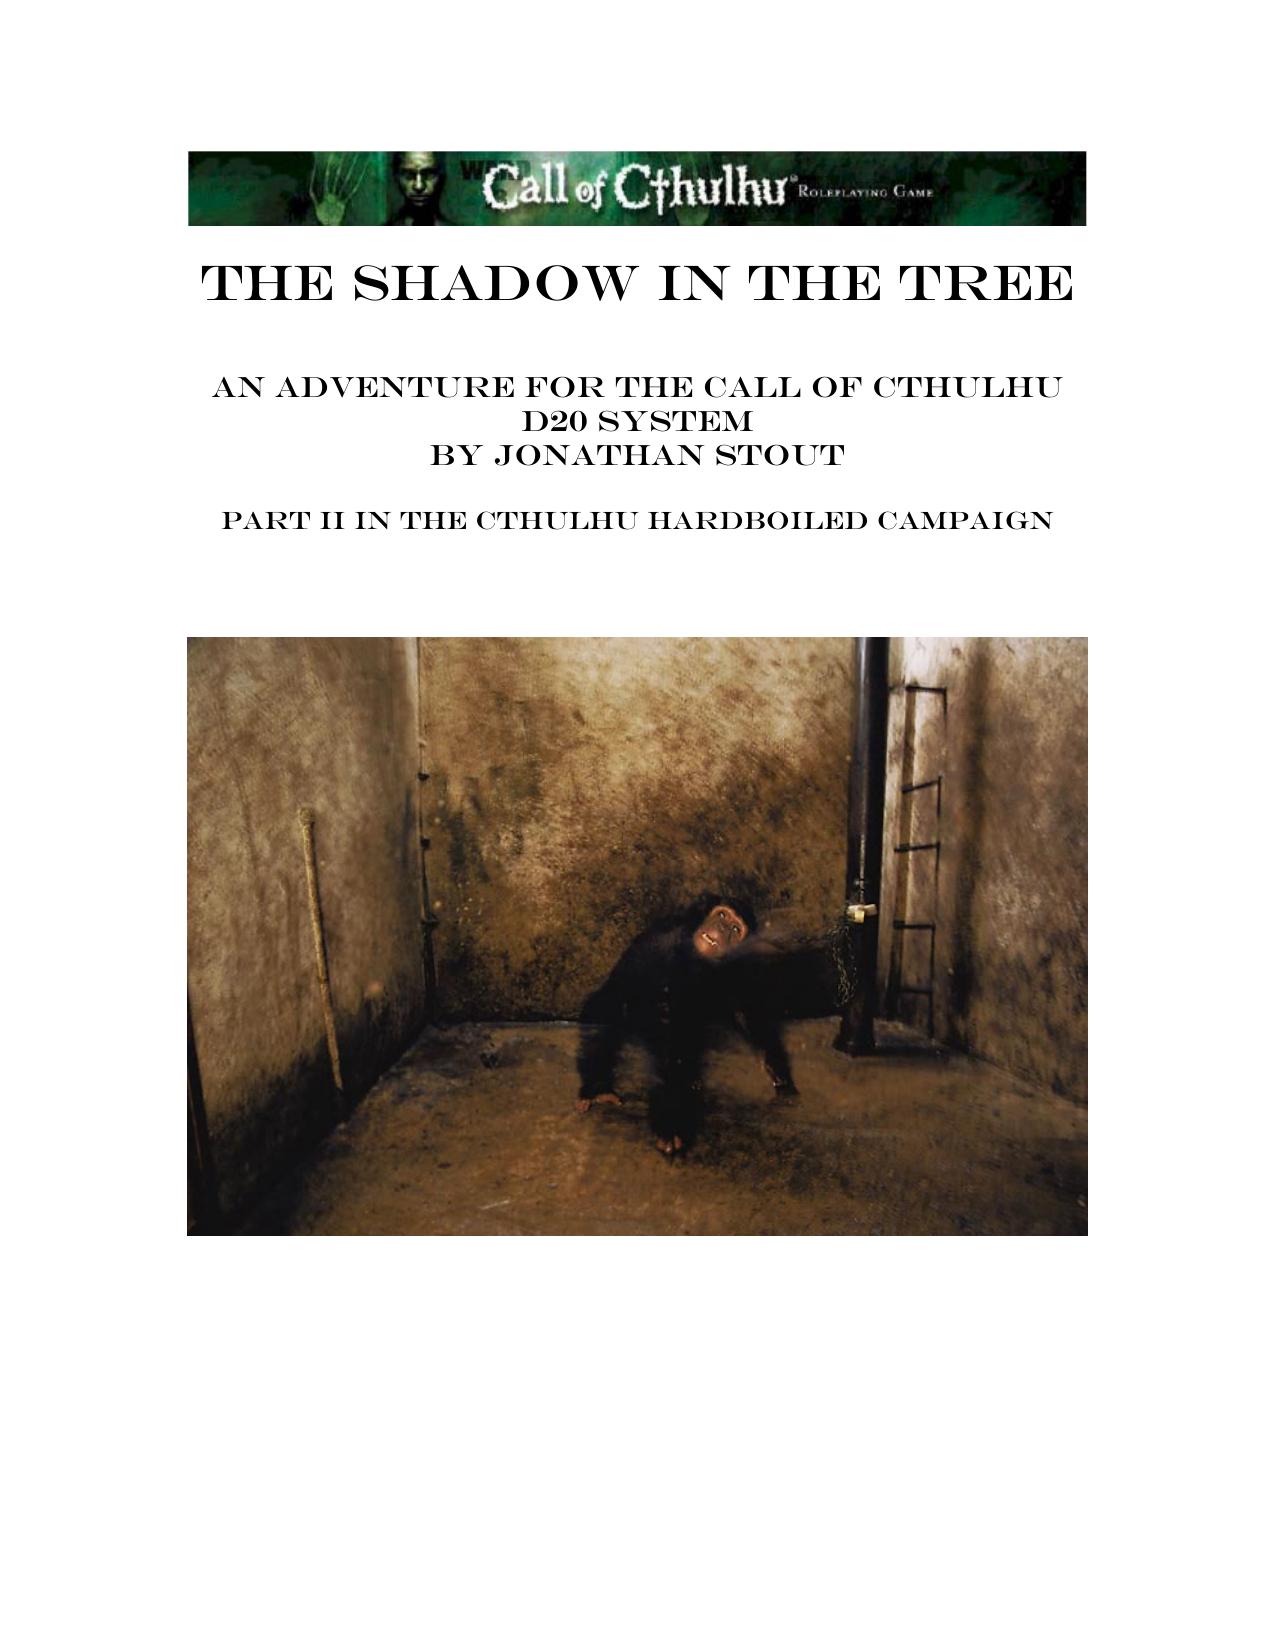 The Shadow in the tree